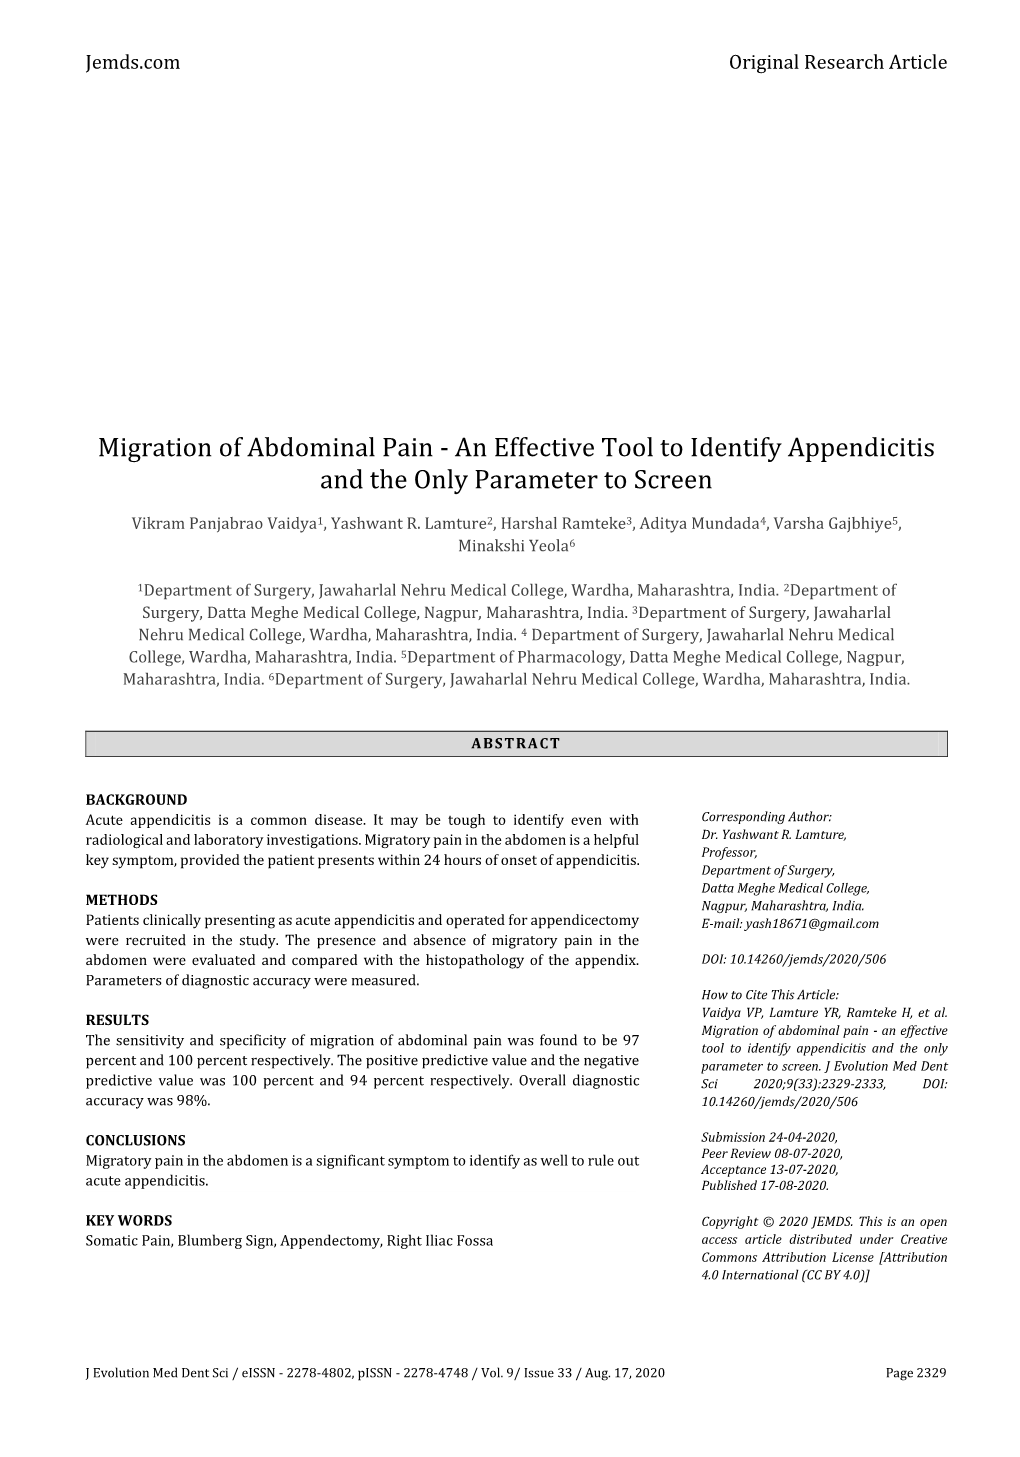 Migration of Abdominal Pain - an Effective Tool to Identify Appendicitis and the Only Parameter to Screen